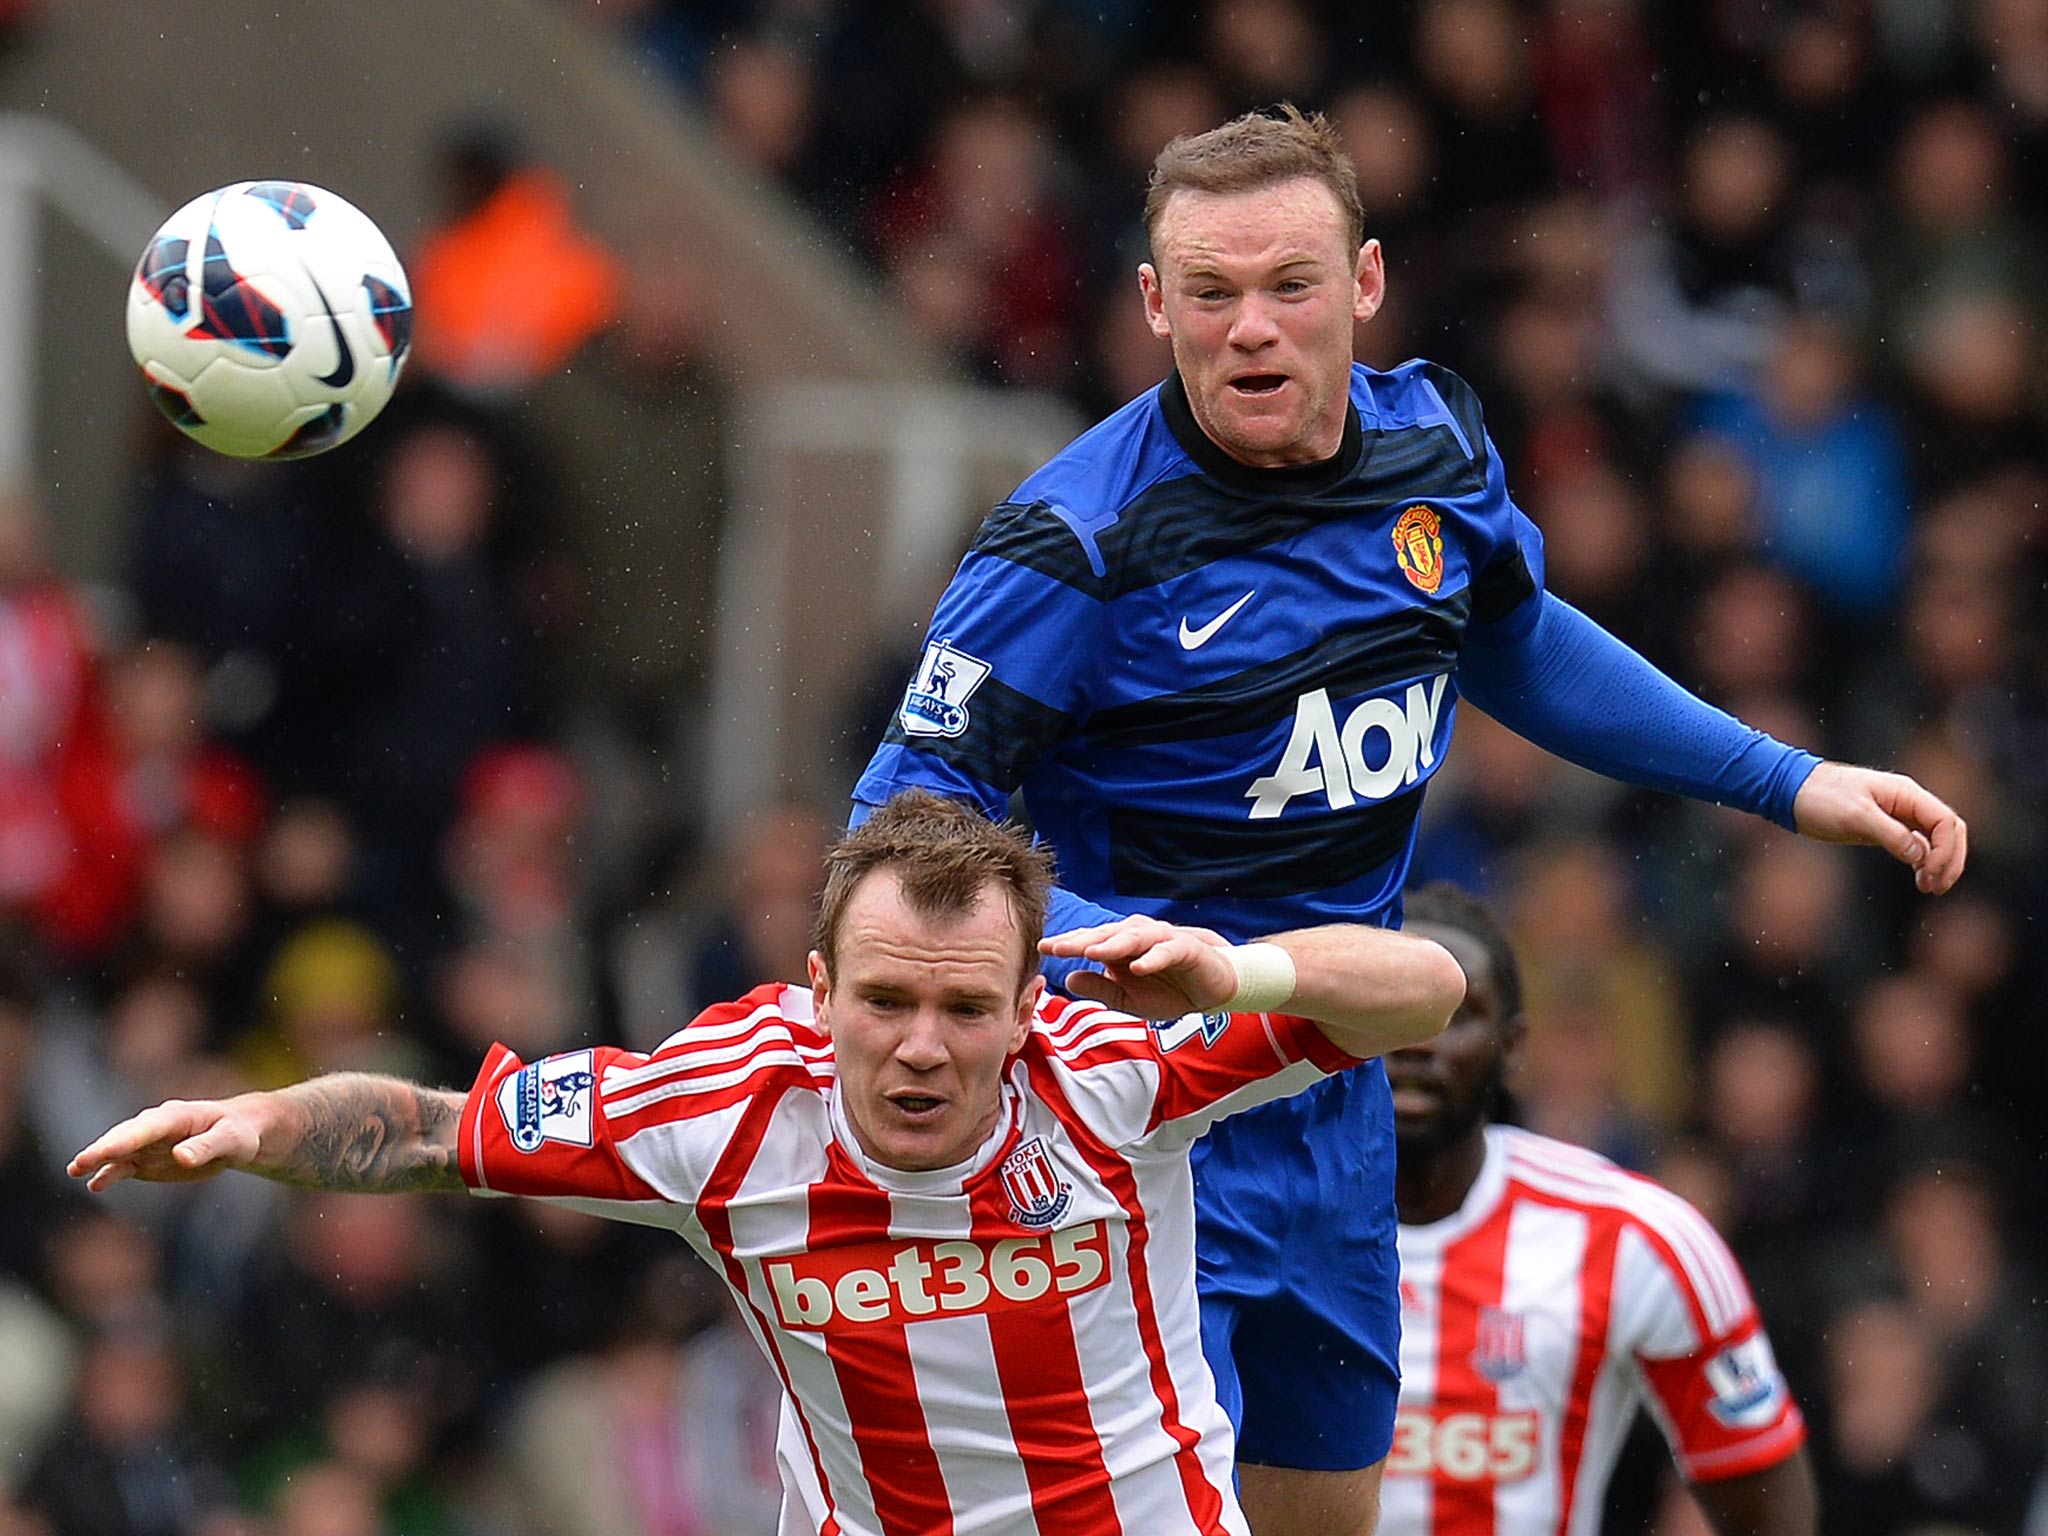 Wayne Rooney in action for Manchester United in their 2-0 win over Stoke